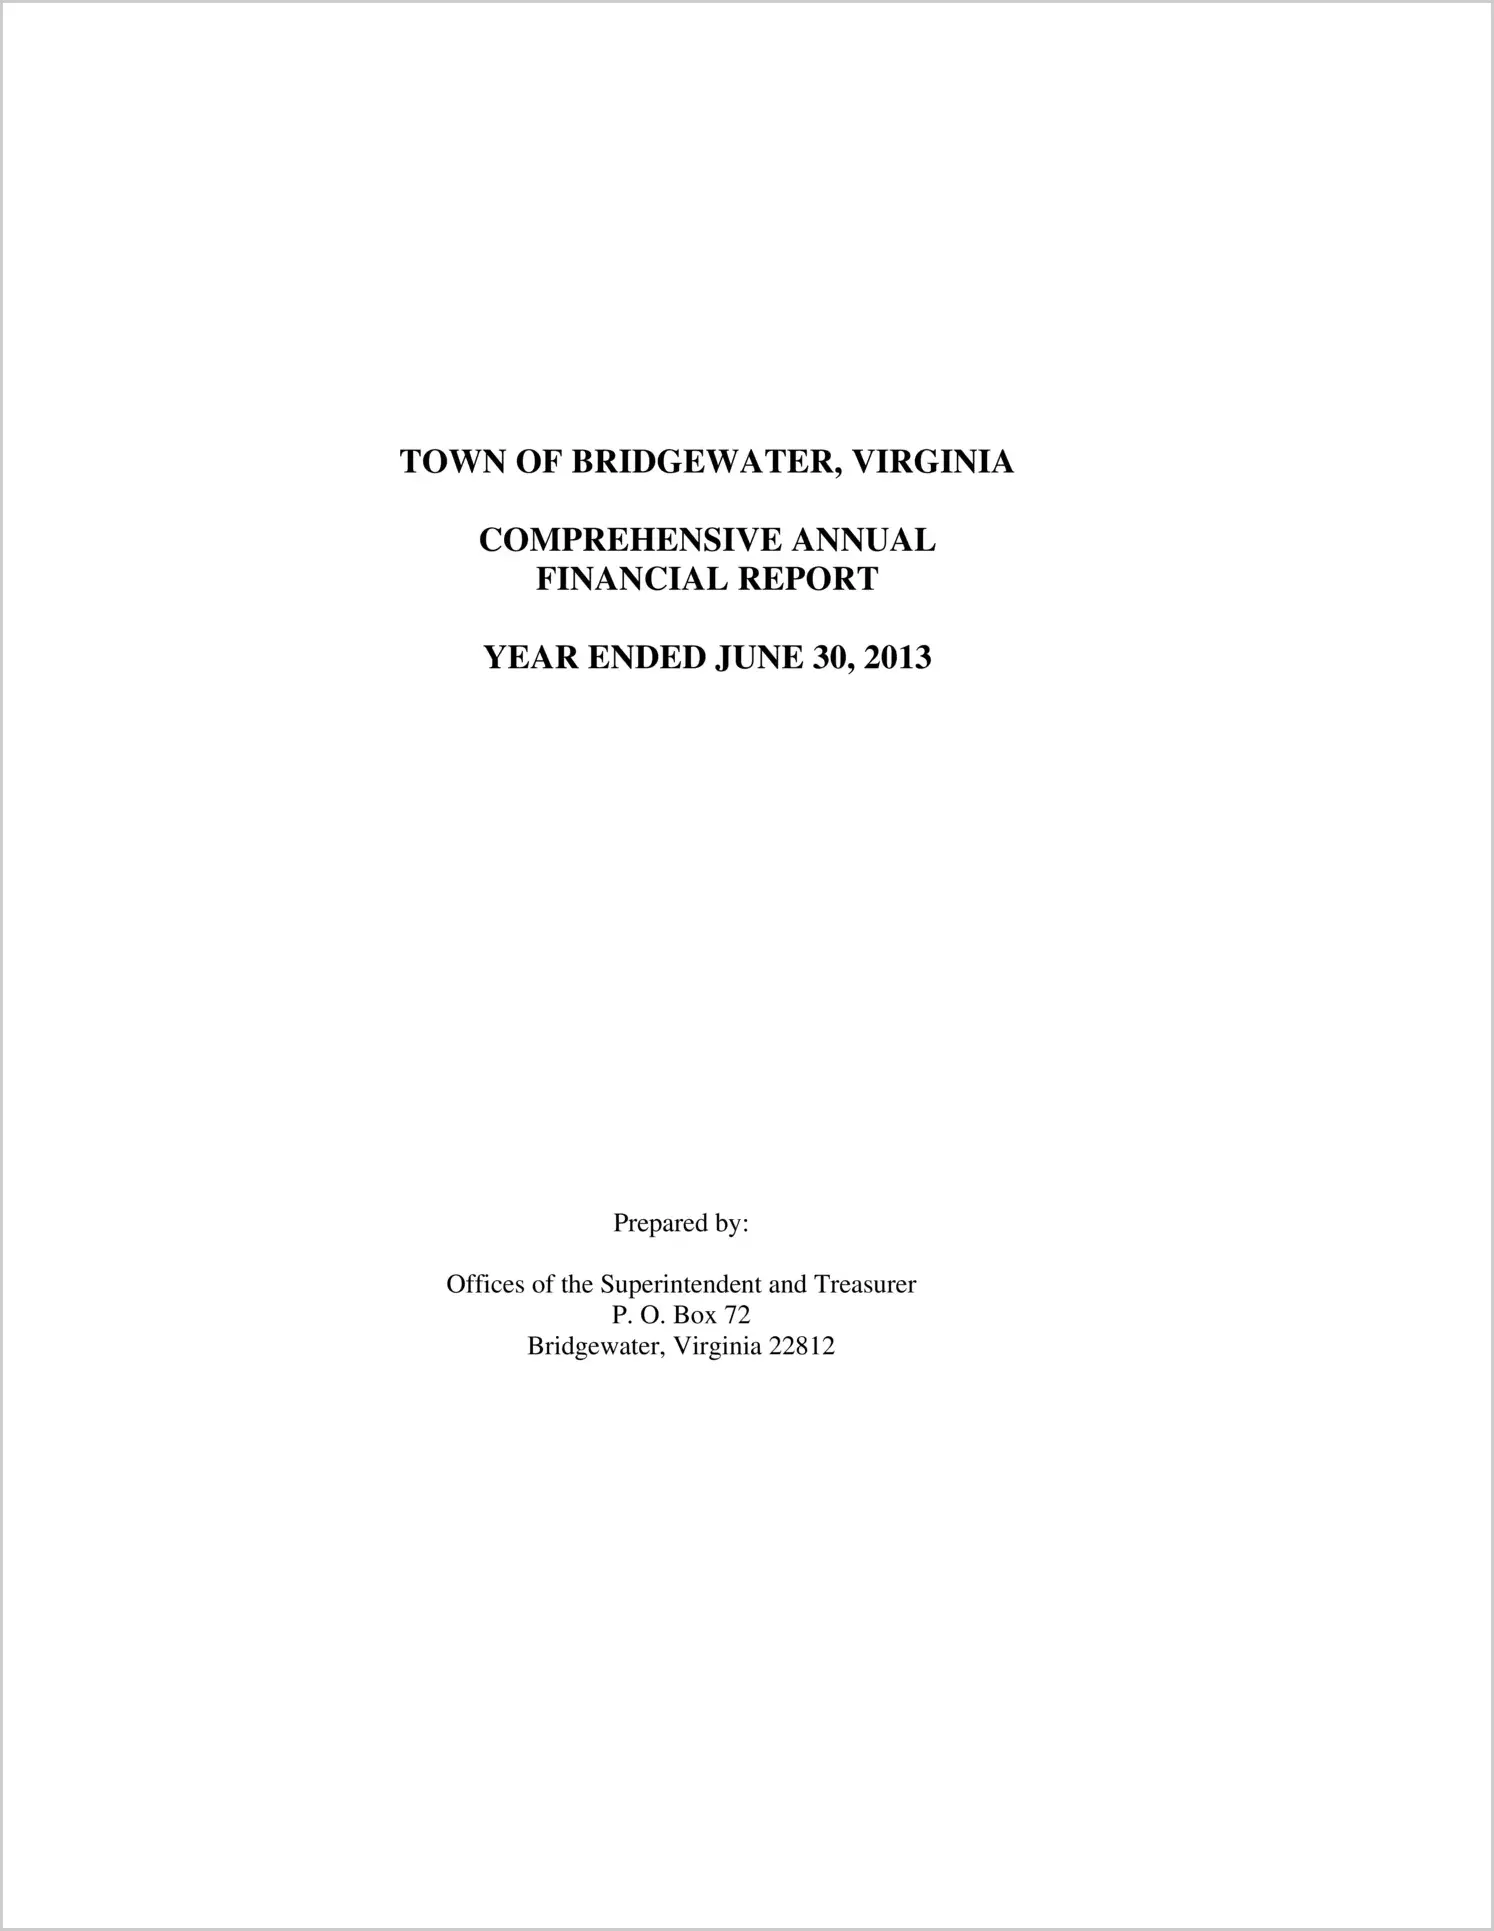 2013 Annual Financial Report for Town of Bridgewater